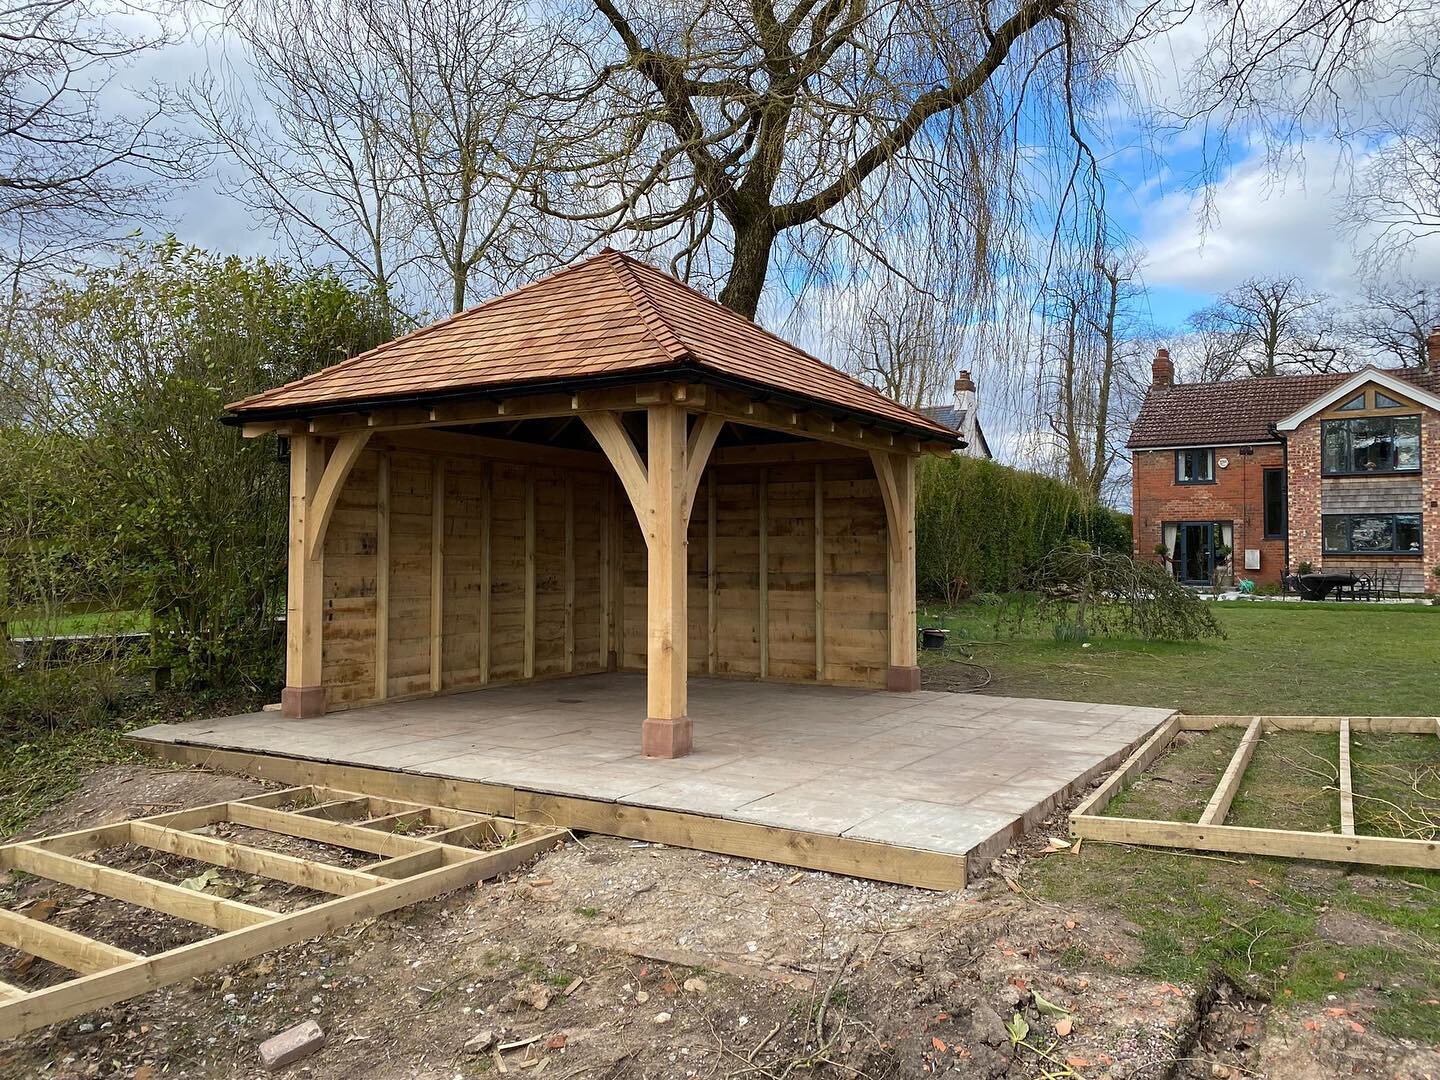 Oak pergola with oak cladding and cedar shingle roof. Looking great, fabulous space ready for Spring!